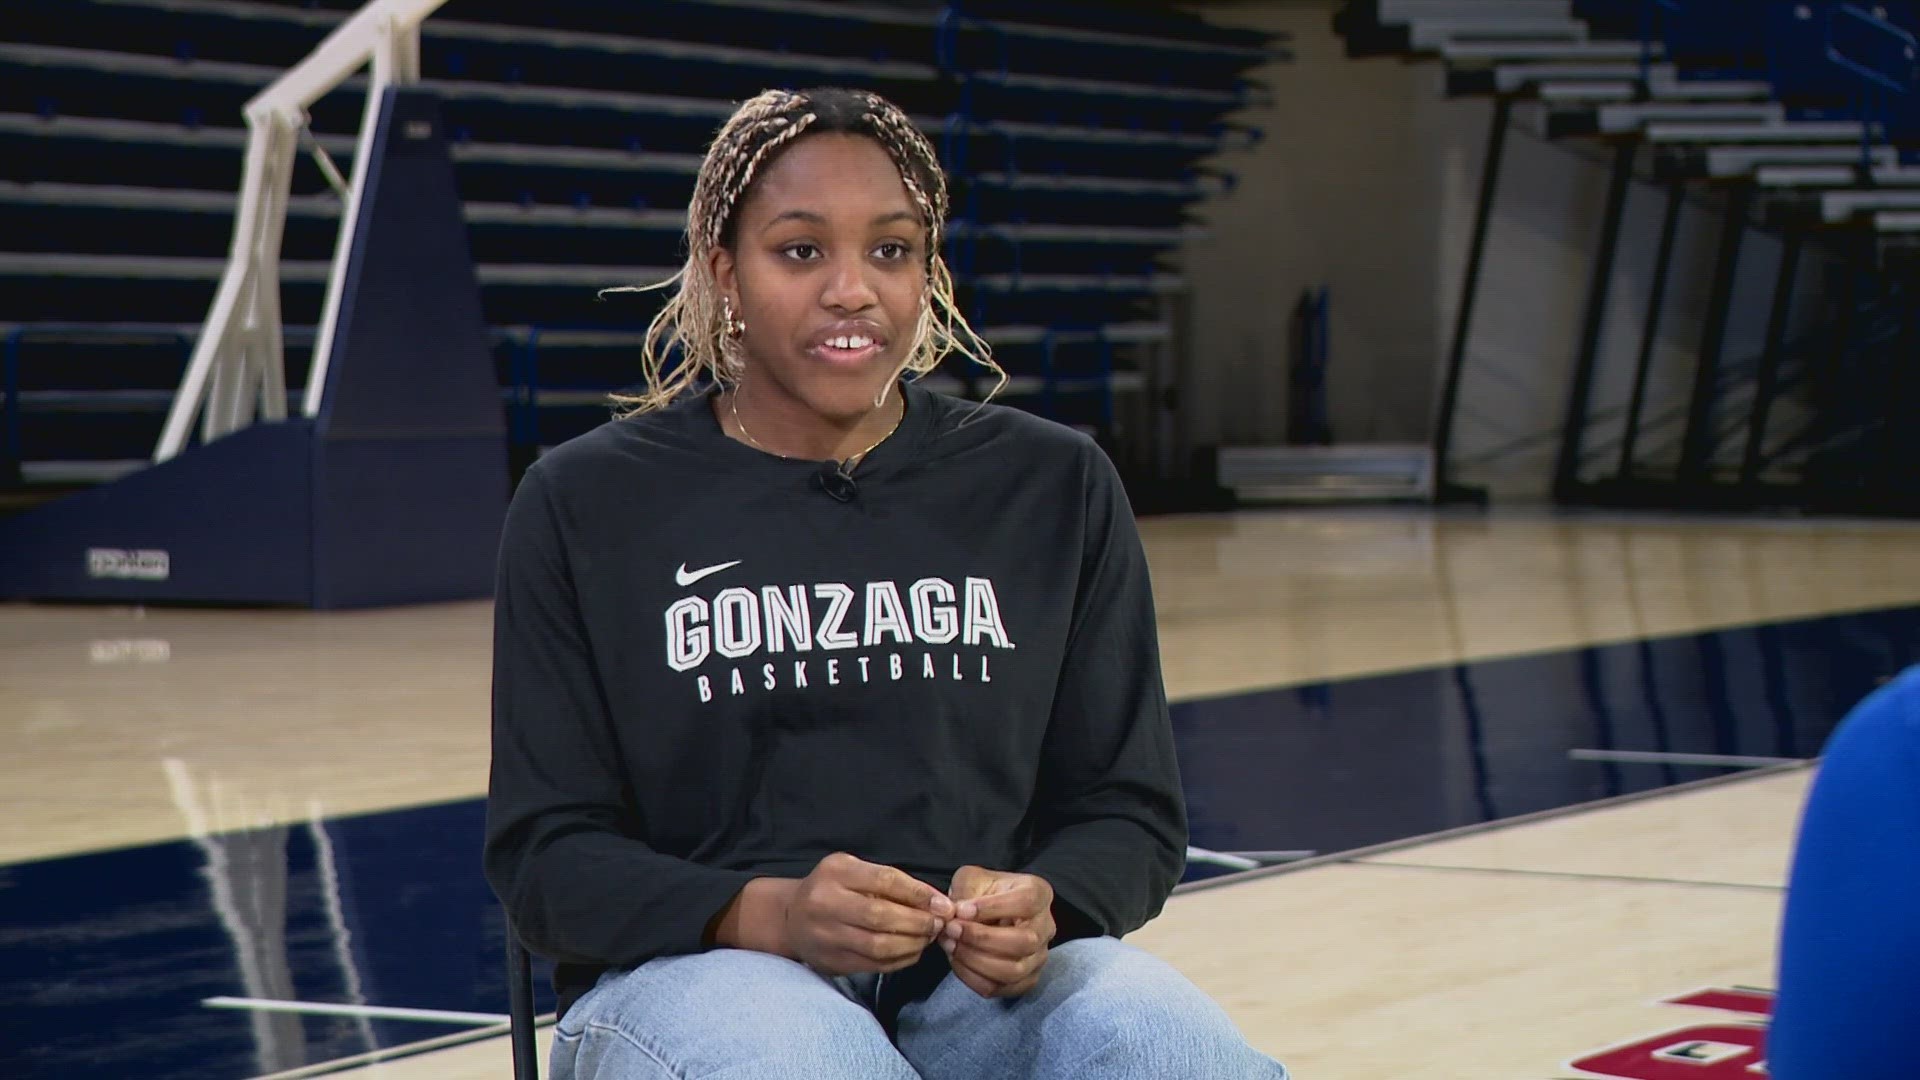 Gonzaga star Yvonne Ejim and Head Coach Lisa Fortier talked about the Gonzaga women’s team and how they are navigating the growing popularity in women’s basketball.